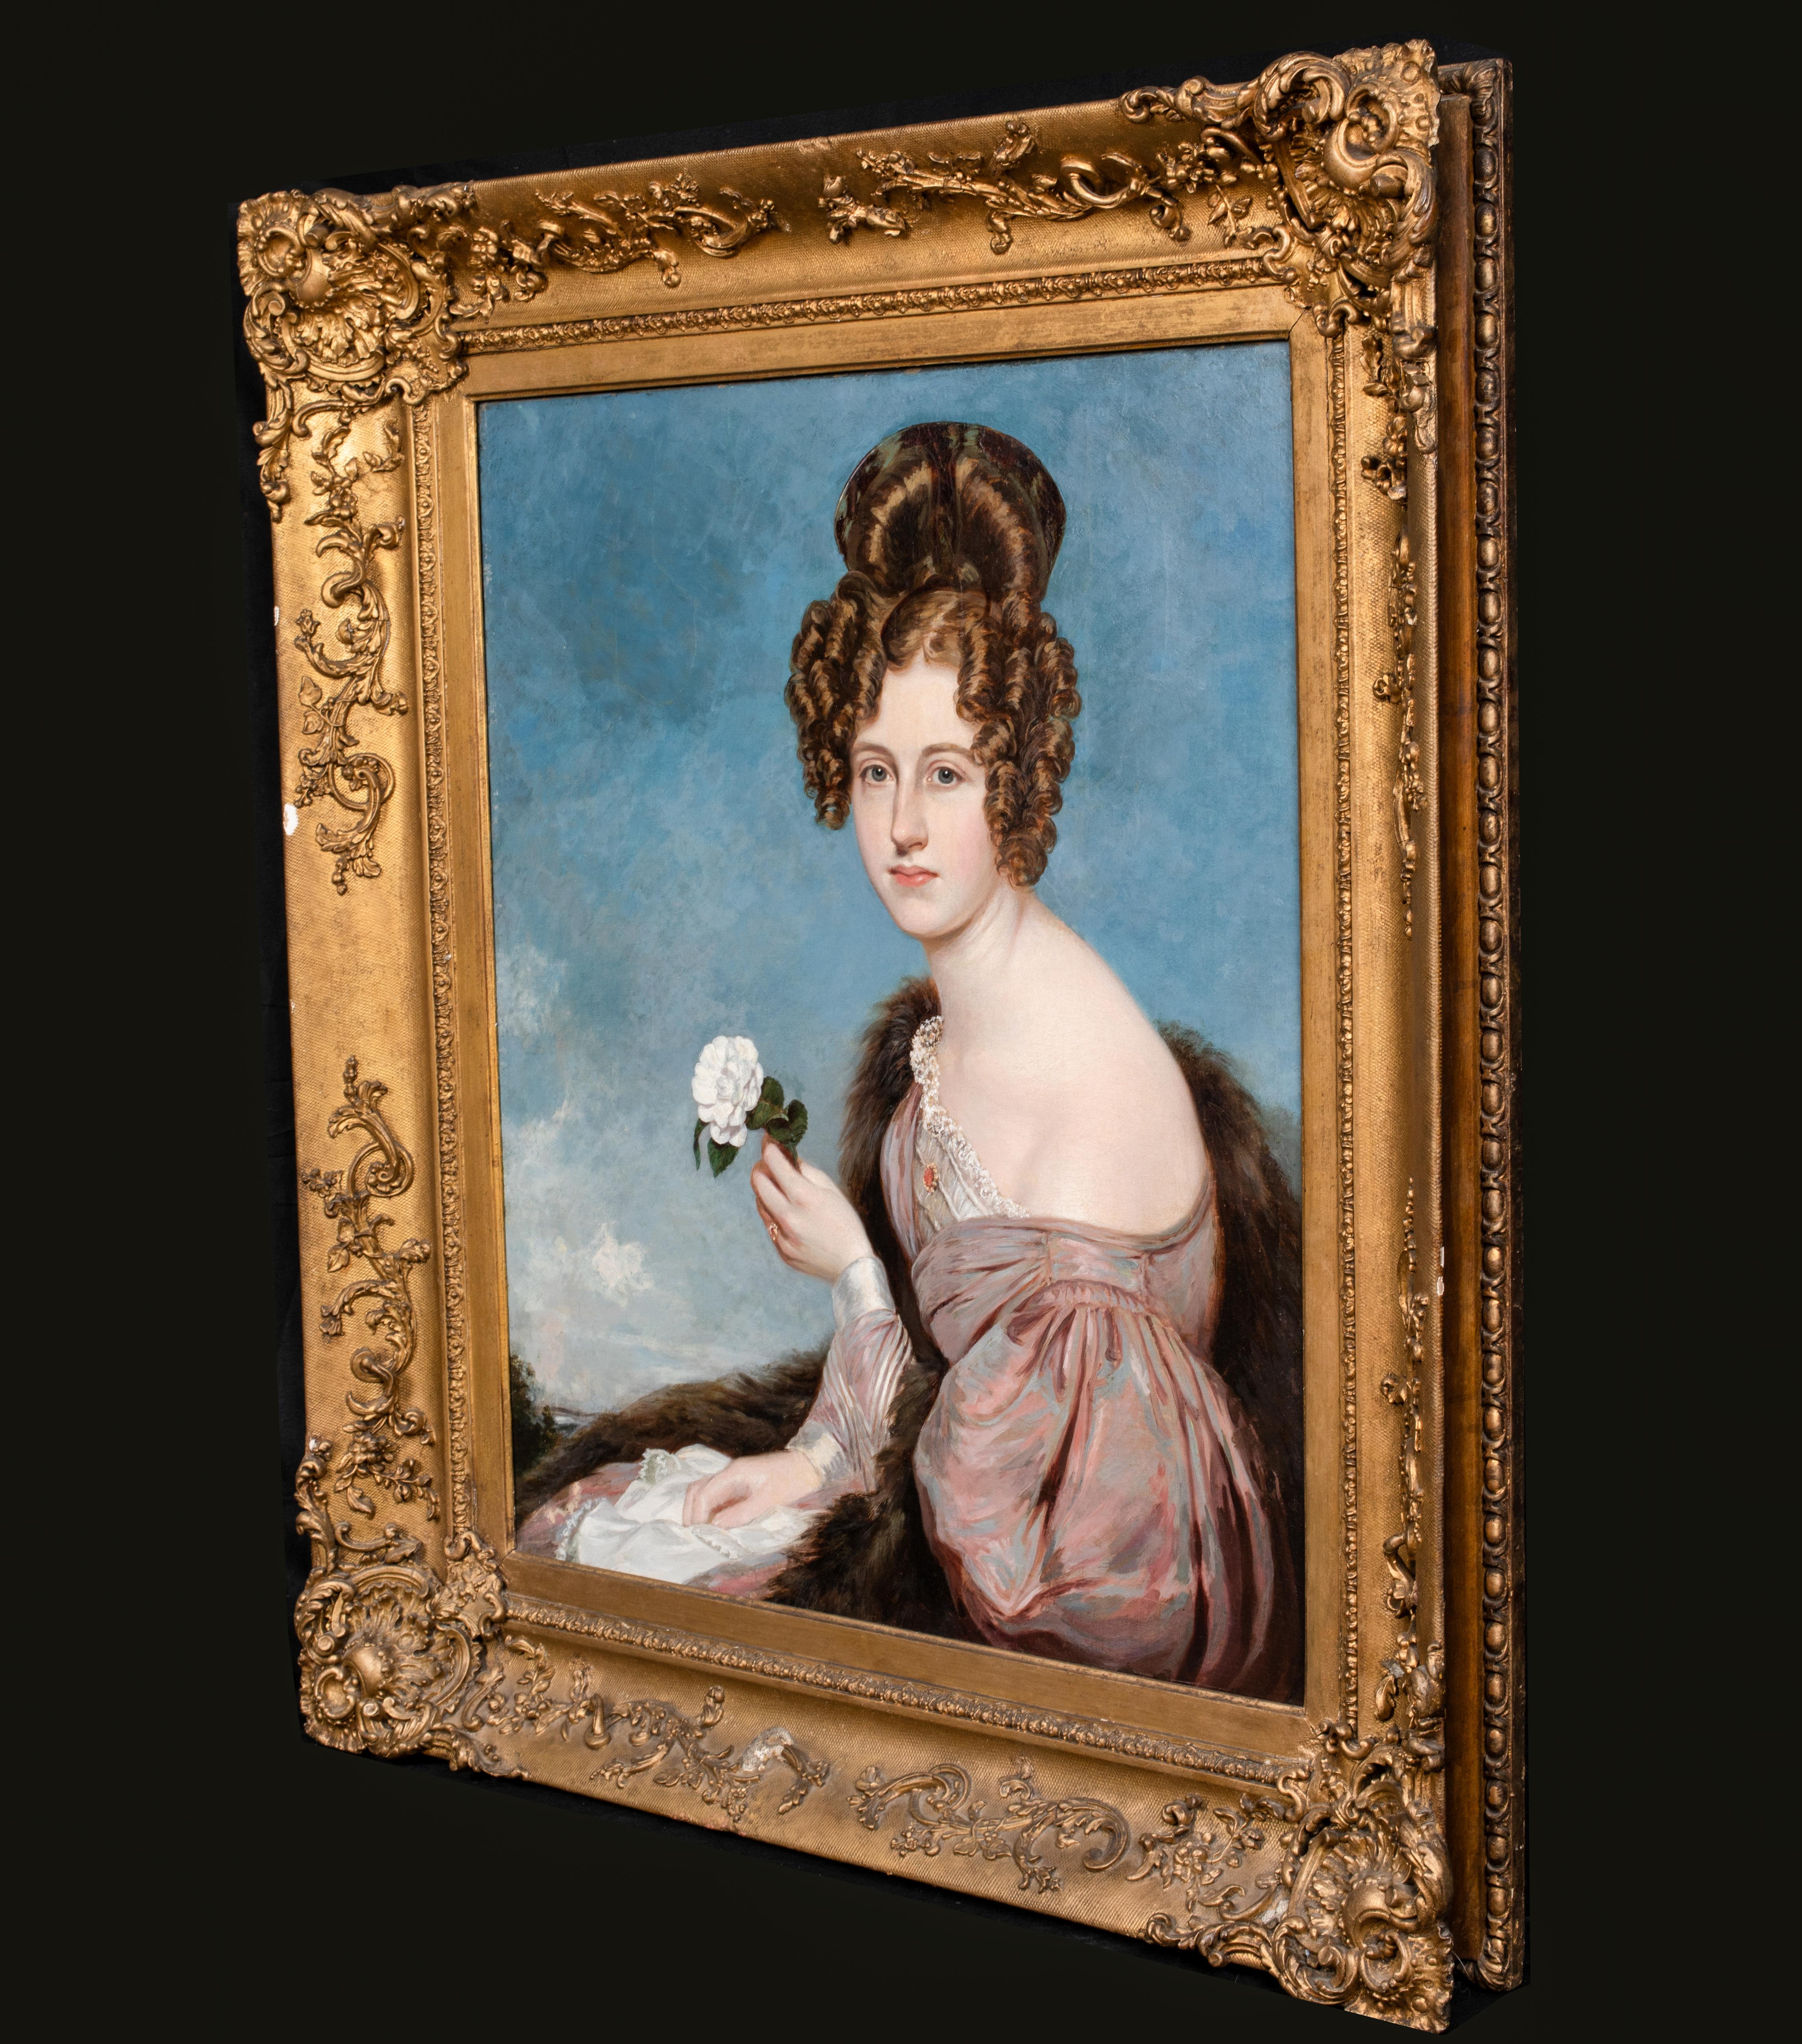  Portrait Of A Lady Holding A Camellia, early 19th Century    5